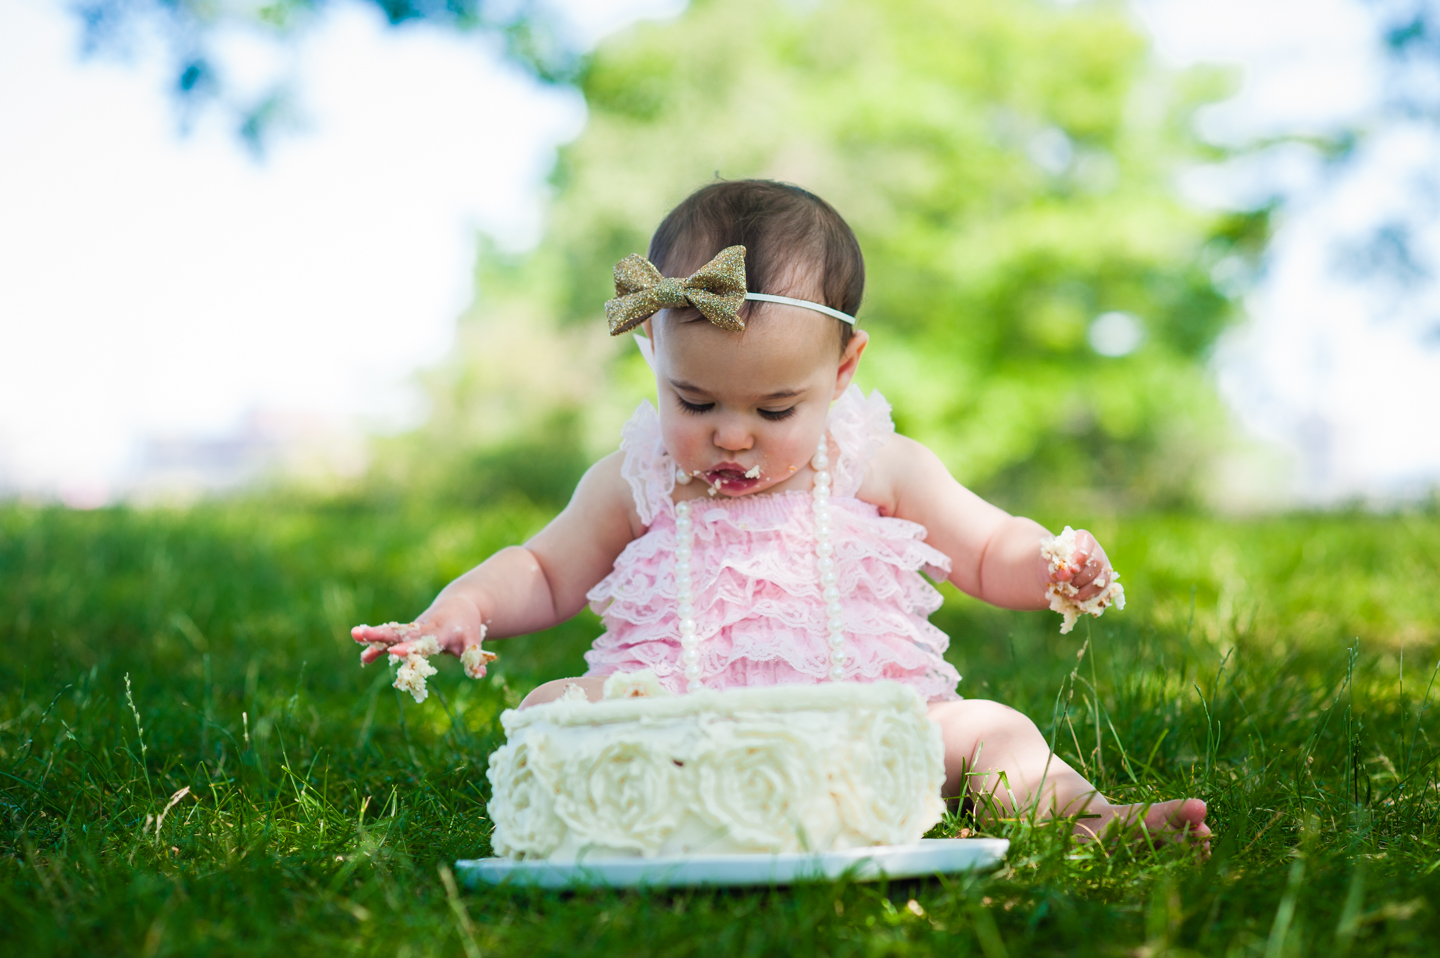 baby during her 1st year cake smash looks at her cake 